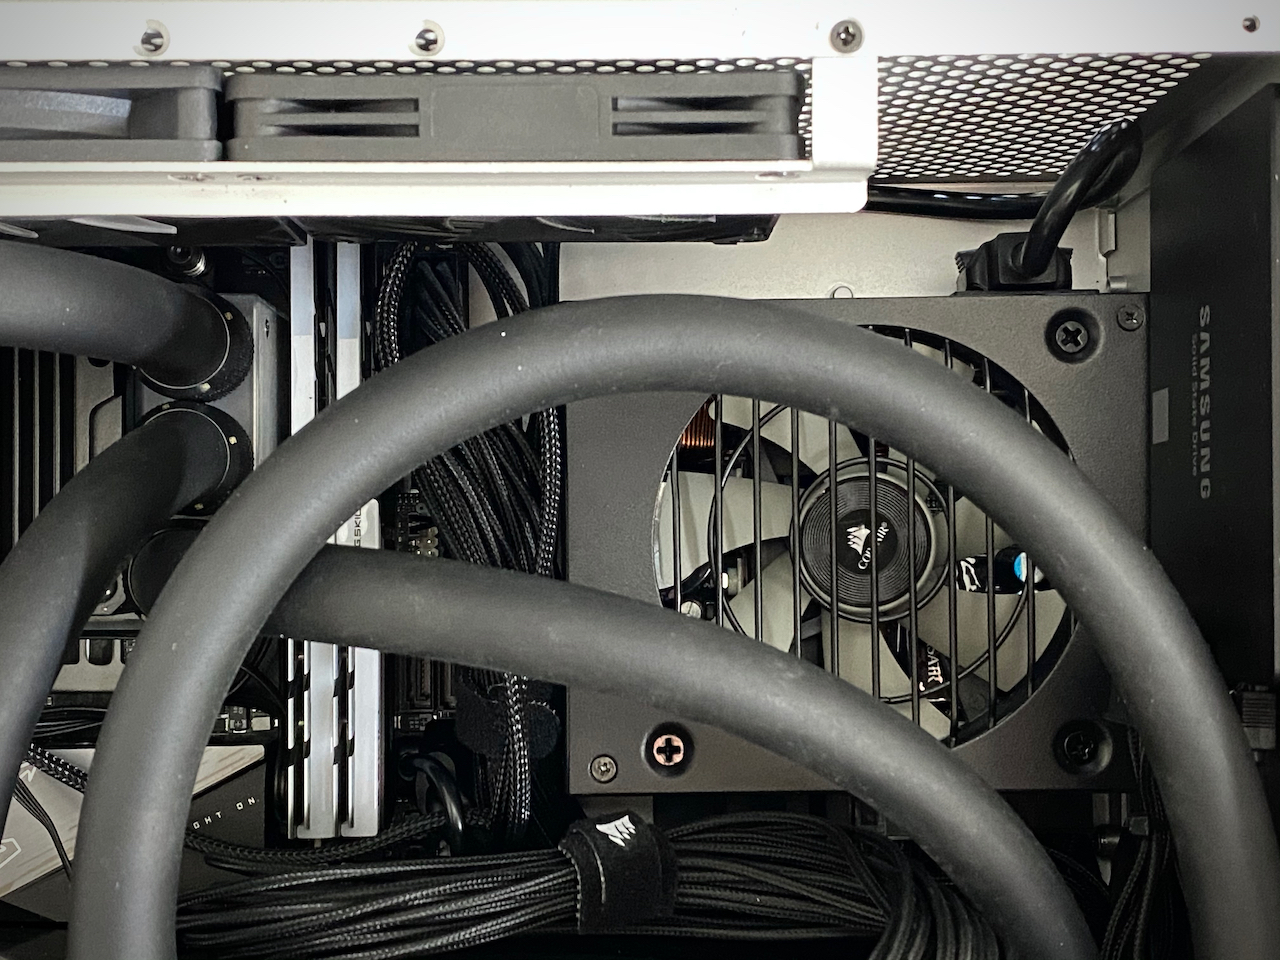 Close up picture of the power supply mounted on the back panel of the case in the upper right corner, seen behind the black water tubing.